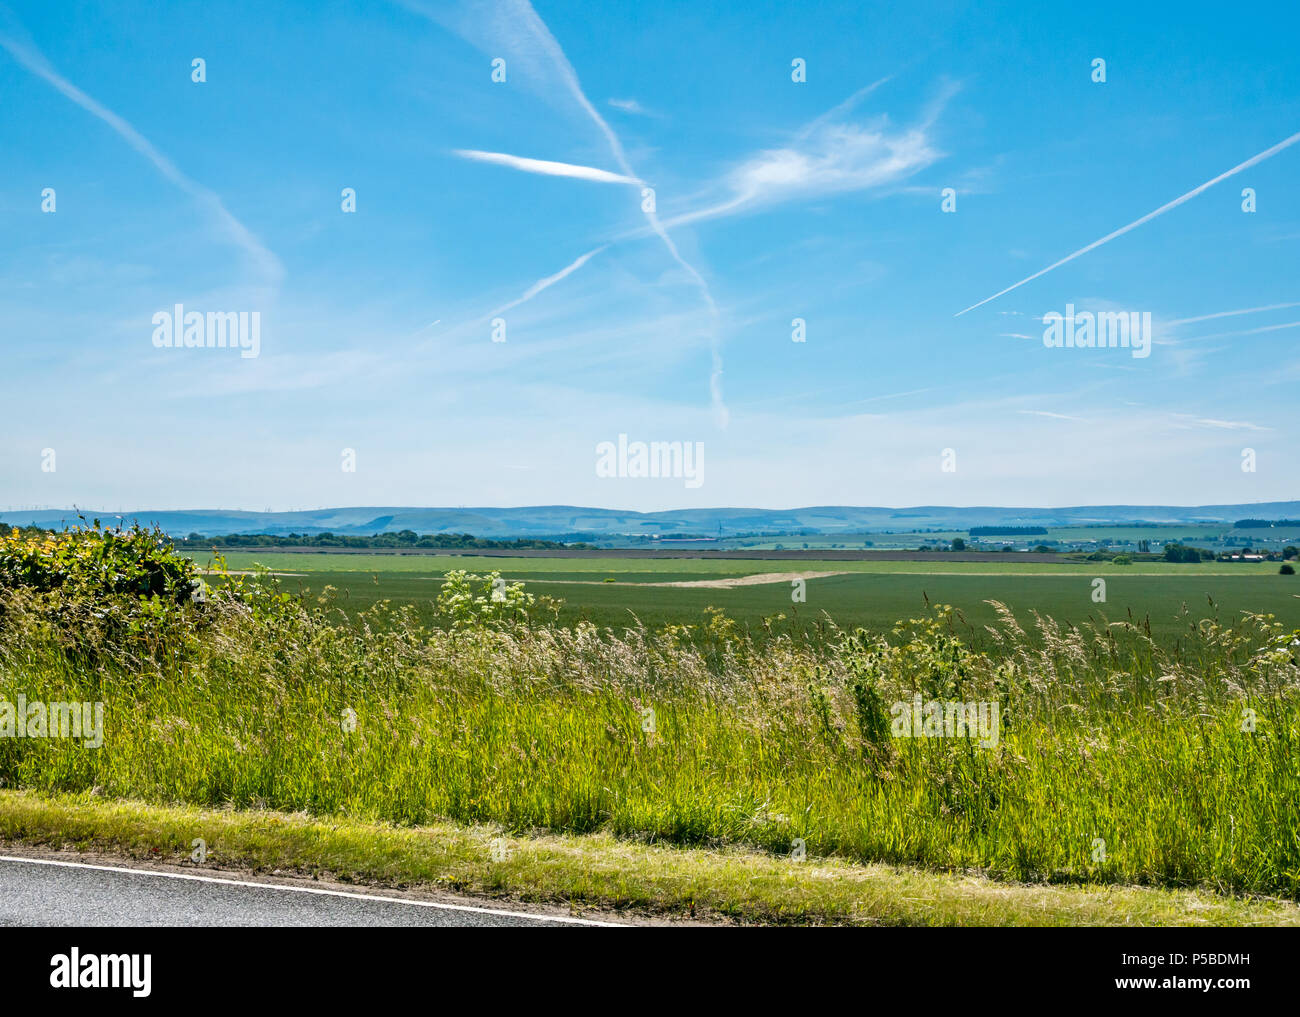 Summer landscape across agricultural fields with blue sky and cloud streaks, view of Lammermuir Hills, East Lothian, Scotland, UK Stock Photo